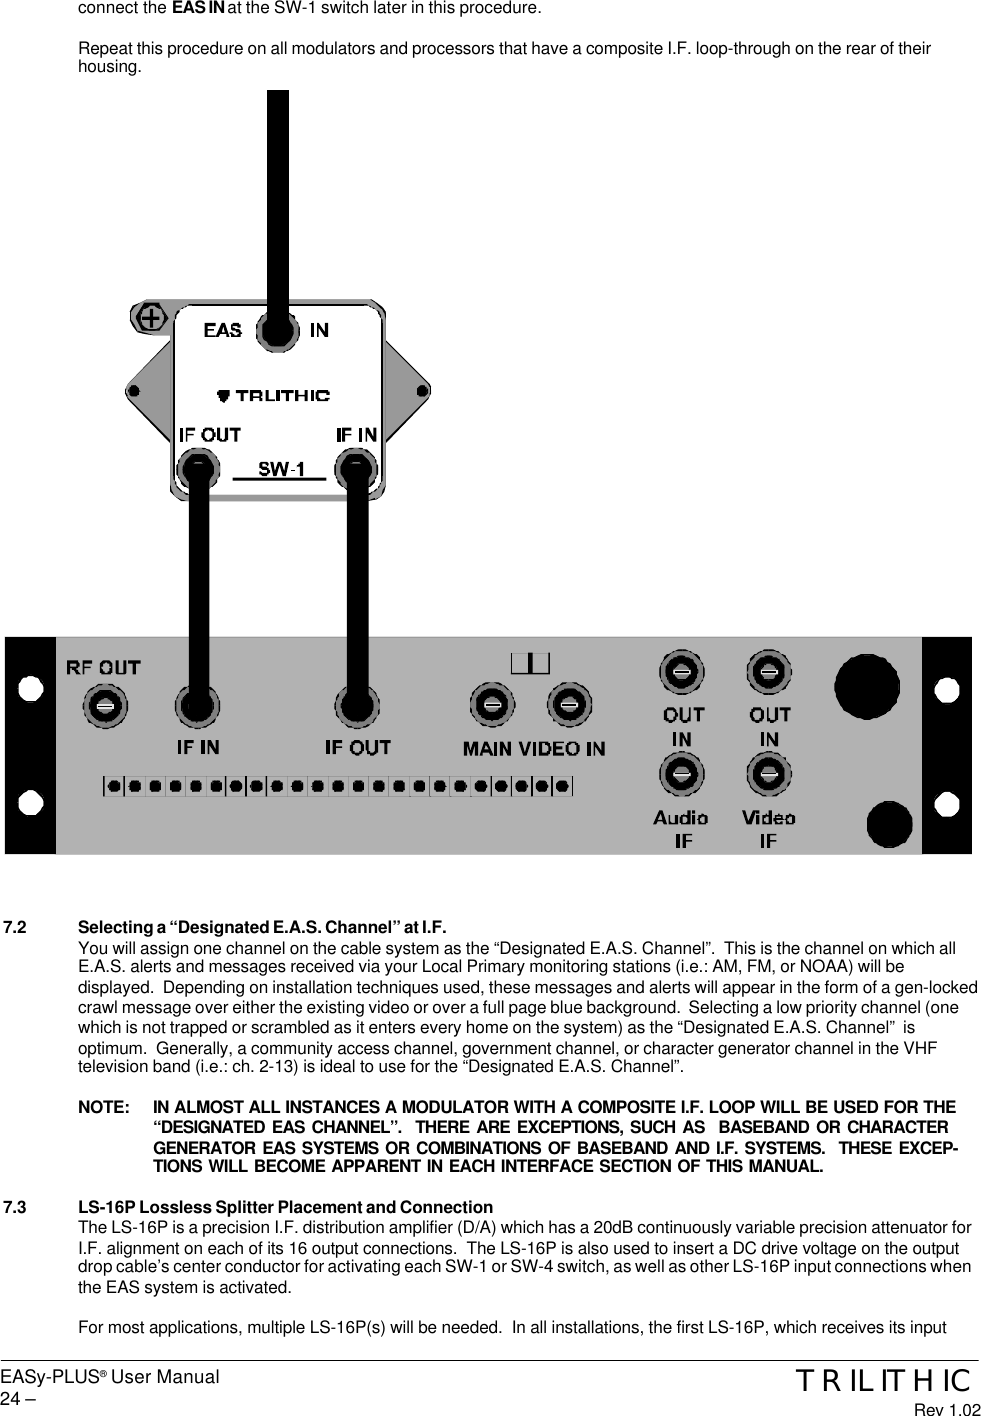 EASy-PLUS® User Manual24 – TRILITHICRev 1.02connect the EAS IN at the SW-1 switch later in this procedure.Repeat this procedure on all modulators and processors that have a composite I.F. loop-through on the rear of theirhousing.7.2 Selecting a “Designated E.A.S. Channel” at I.F.You will assign one channel on the cable system as the “Designated E.A.S. Channel”.  This is the channel on which allE.A.S. alerts and messages received via your Local Primary monitoring stations (i.e.: AM, FM, or NOAA) will bedisplayed.  Depending on installation techniques used, these messages and alerts will appear in the form of a gen-lockedcrawl message over either the existing video or over a full page blue background.  Selecting a low priority channel (onewhich is not trapped or scrambled as it enters every home on the system) as the “Designated E.A.S. Channel”  isoptimum.  Generally, a community access channel, government channel, or character generator channel in the VHFtelevision band (i.e.: ch. 2-13) is ideal to use for the “Designated E.A.S. Channel”.NOTE: IN ALMOST ALL INSTANCES A MODULATOR WITH A COMPOSITE I.F. LOOP WILL BE USED FOR THE“DESIGNATED EAS CHANNEL”.  THERE ARE EXCEPTIONS, SUCH AS  BASEBAND OR CHARACTERGENERATOR EAS SYSTEMS OR COMBINATIONS OF BASEBAND AND I.F. SYSTEMS.  THESE EXCEP-TIONS WILL BECOME APPARENT IN EACH INTERFACE SECTION OF THIS MANUAL.7.3 LS-16P Lossless Splitter Placement and ConnectionThe LS-16P is a precision I.F. distribution amplifier (D/A) which has a 20dB continuously variable precision attenuator forI.F. alignment on each of its 16 output connections.  The LS-16P is also used to insert a DC drive voltage on the outputdrop cable’s center conductor for activating each SW-1 or SW-4 switch, as well as other LS-16P input connections whenthe EAS system is activated.For most applications, multiple LS-16P(s) will be needed.  In all installations, the first LS-16P, which receives its input